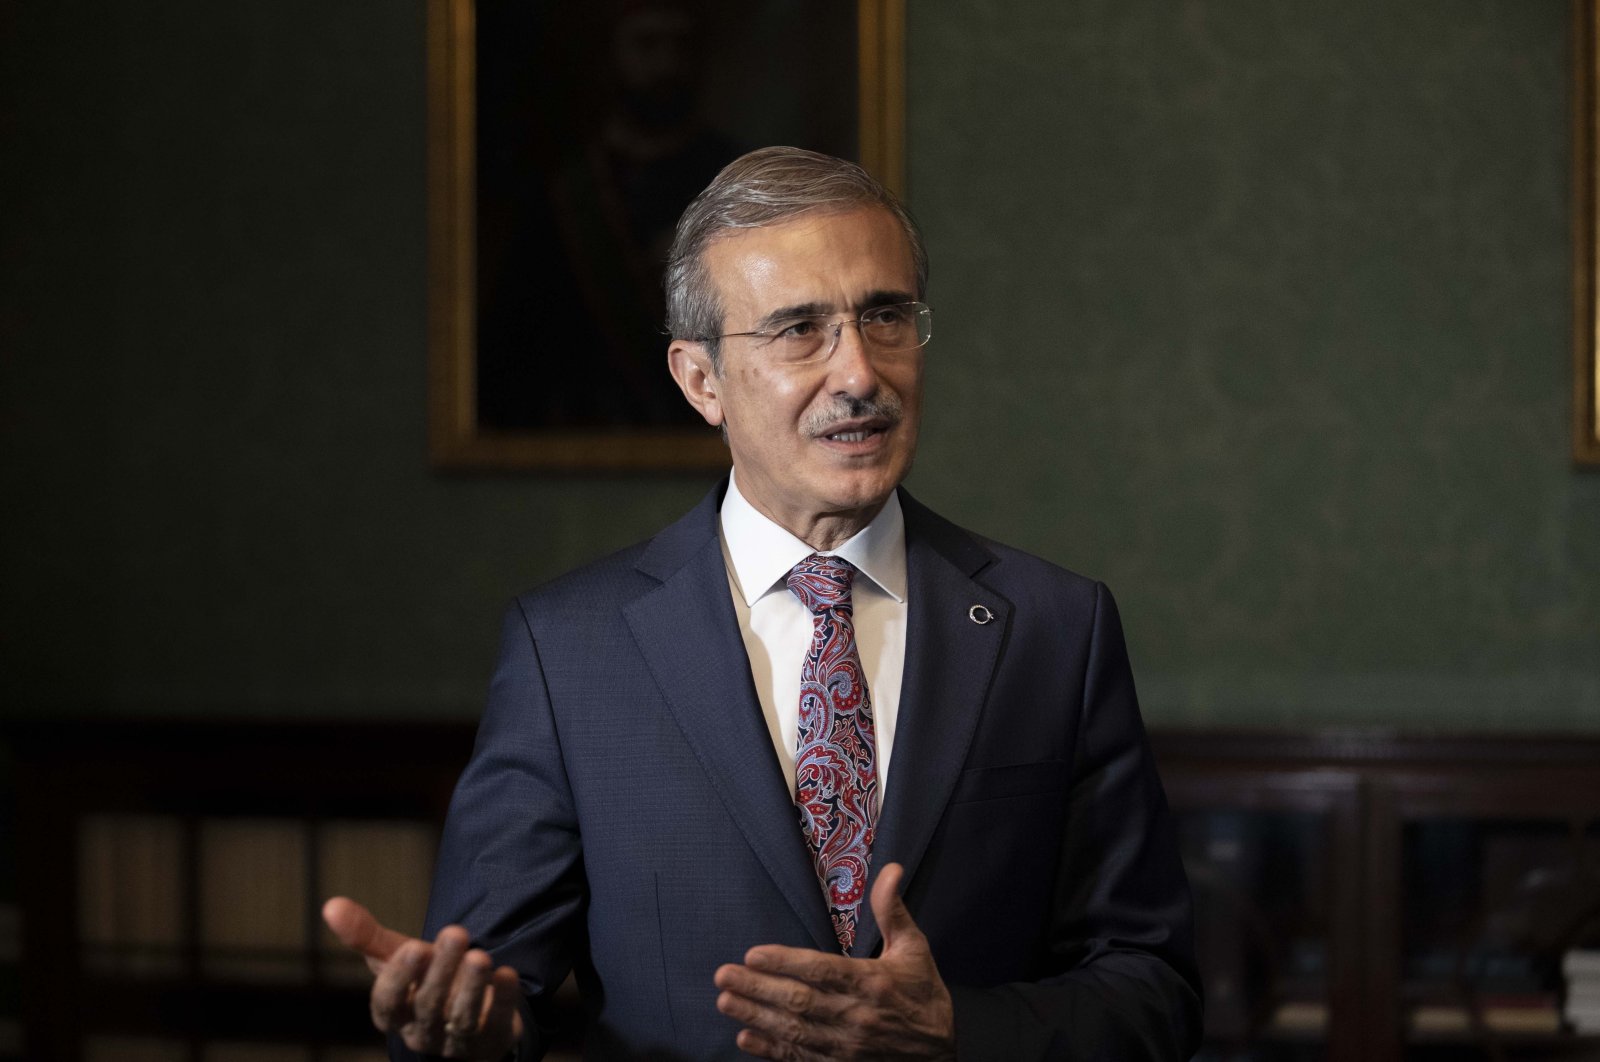 Ismail Demir, the head of the Presidency of Defense Industries (SSB), speaks to reporters during his visit to London, U.K., May 20, 2022. (AA Photo)